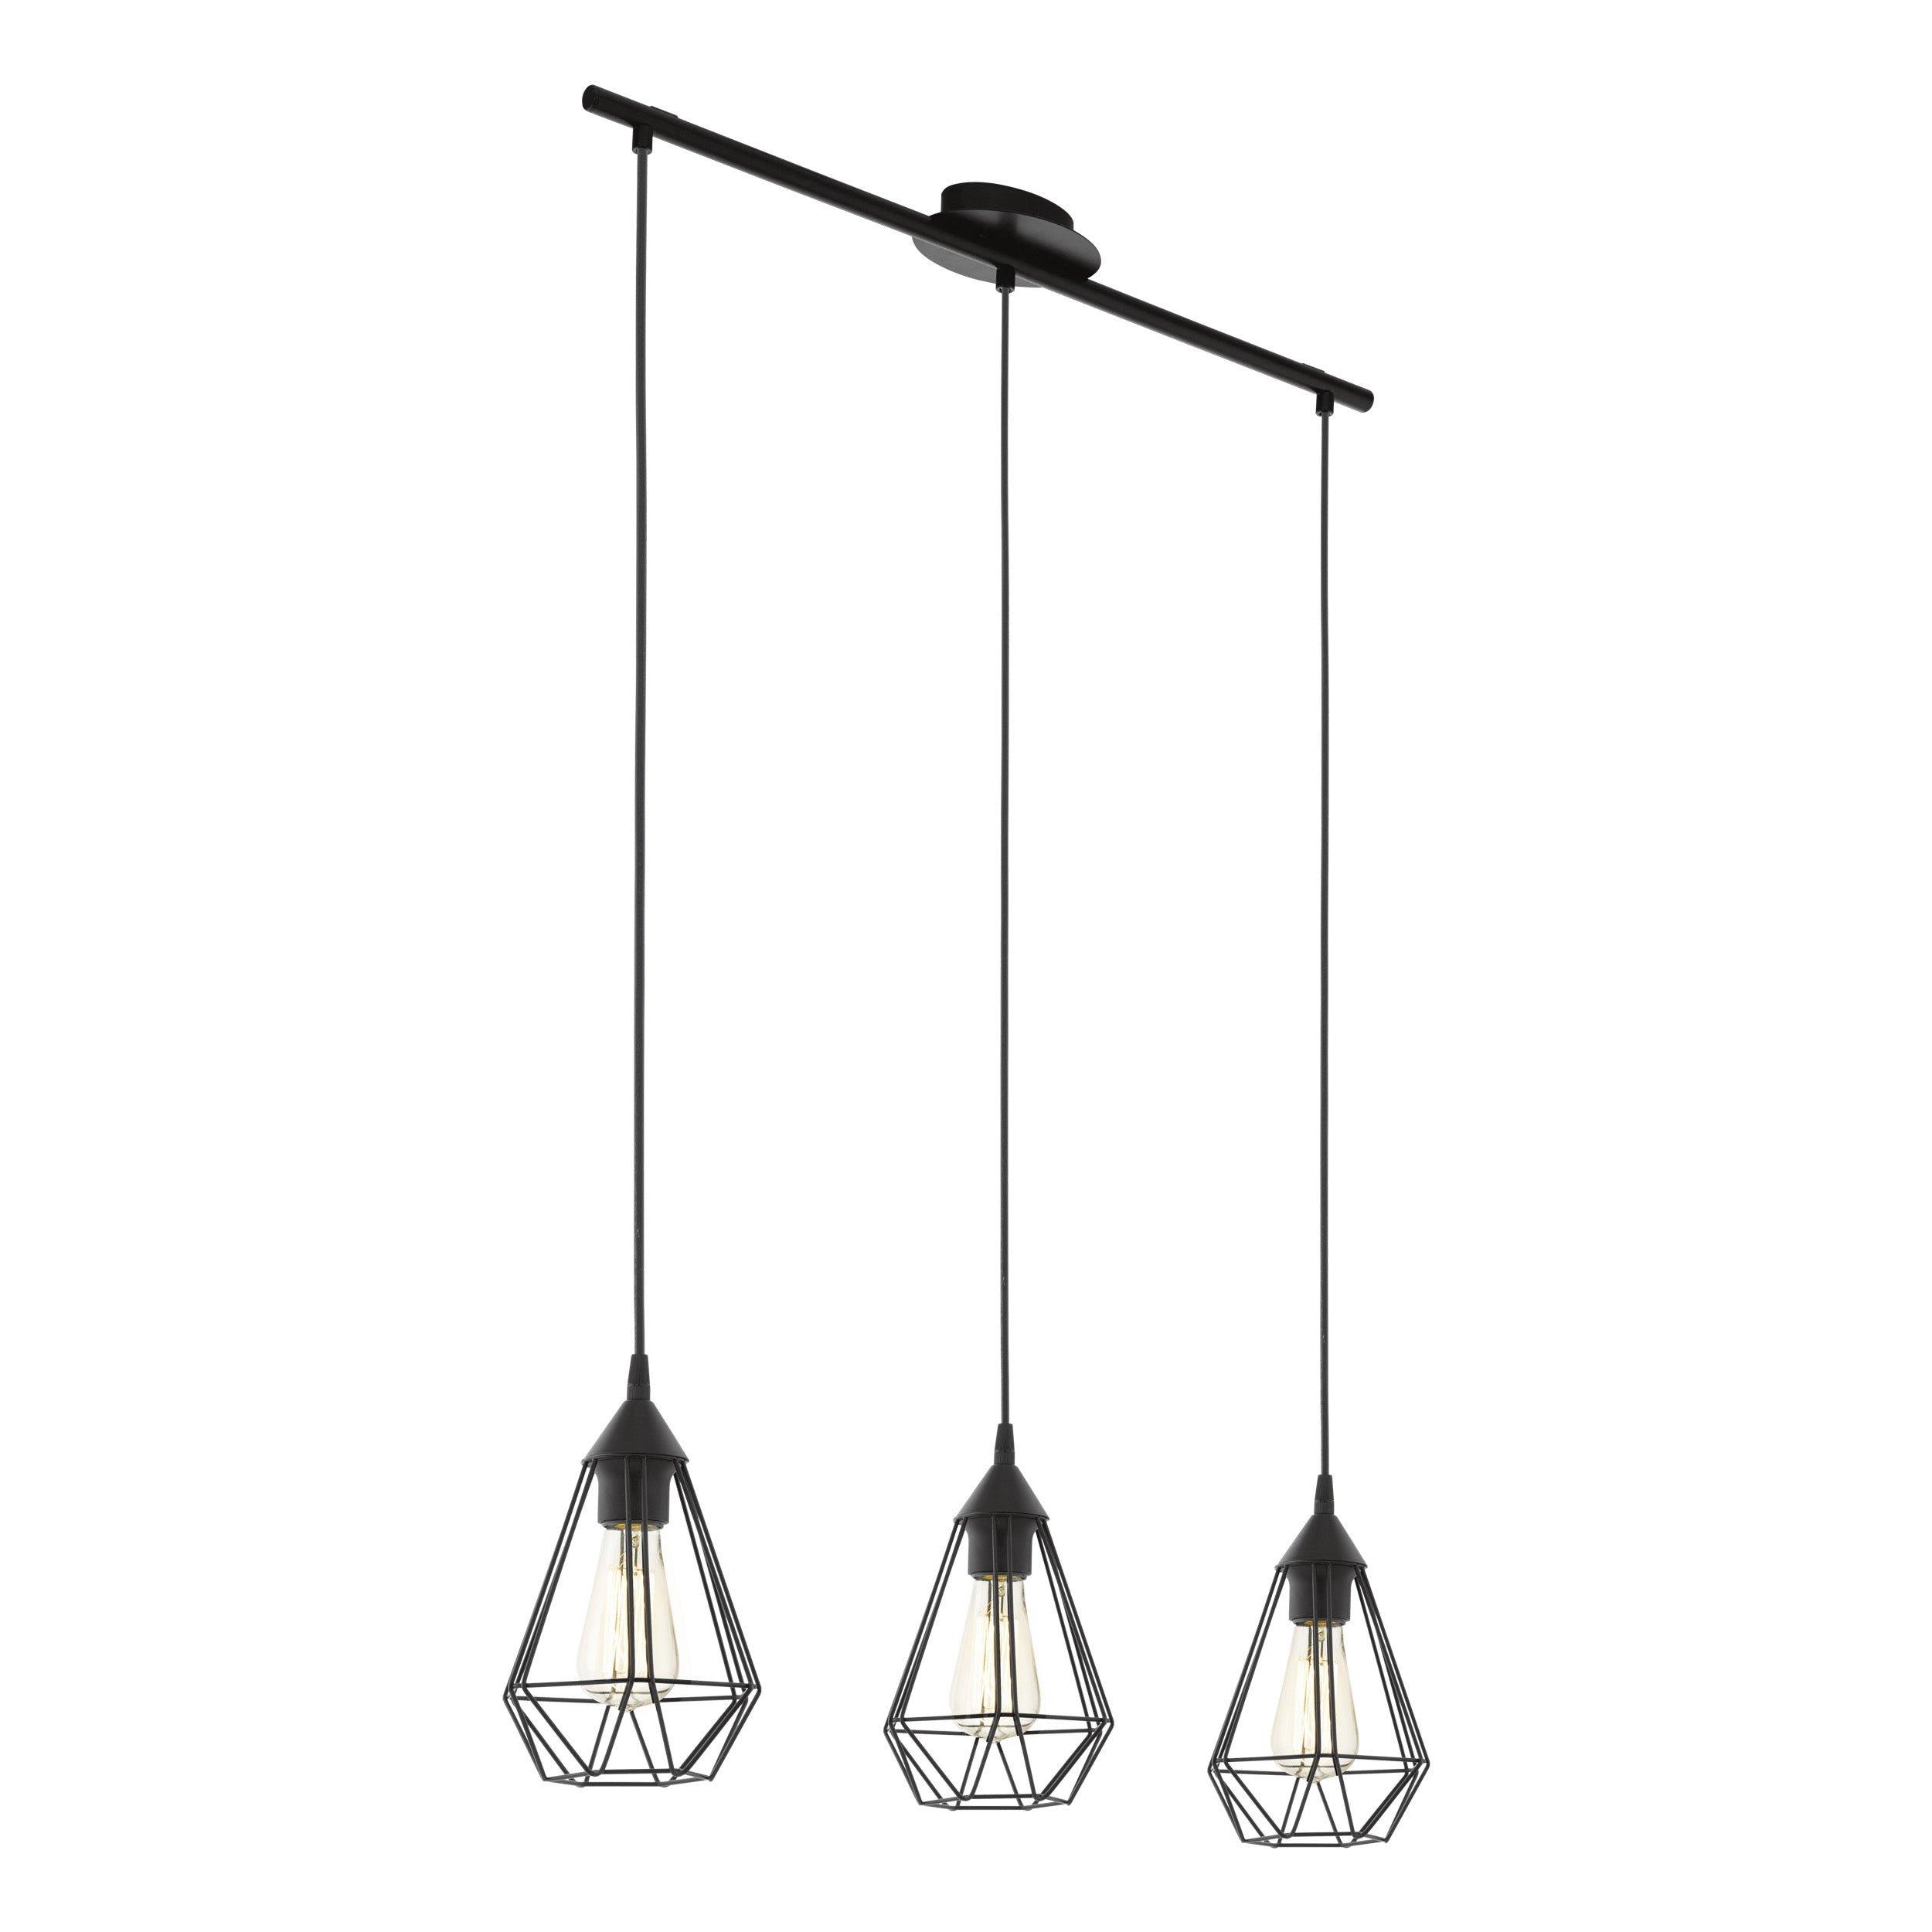 Hanging Ceiling Pendant Light Black Wire Cage 3x E27 Kitchen Island Feature